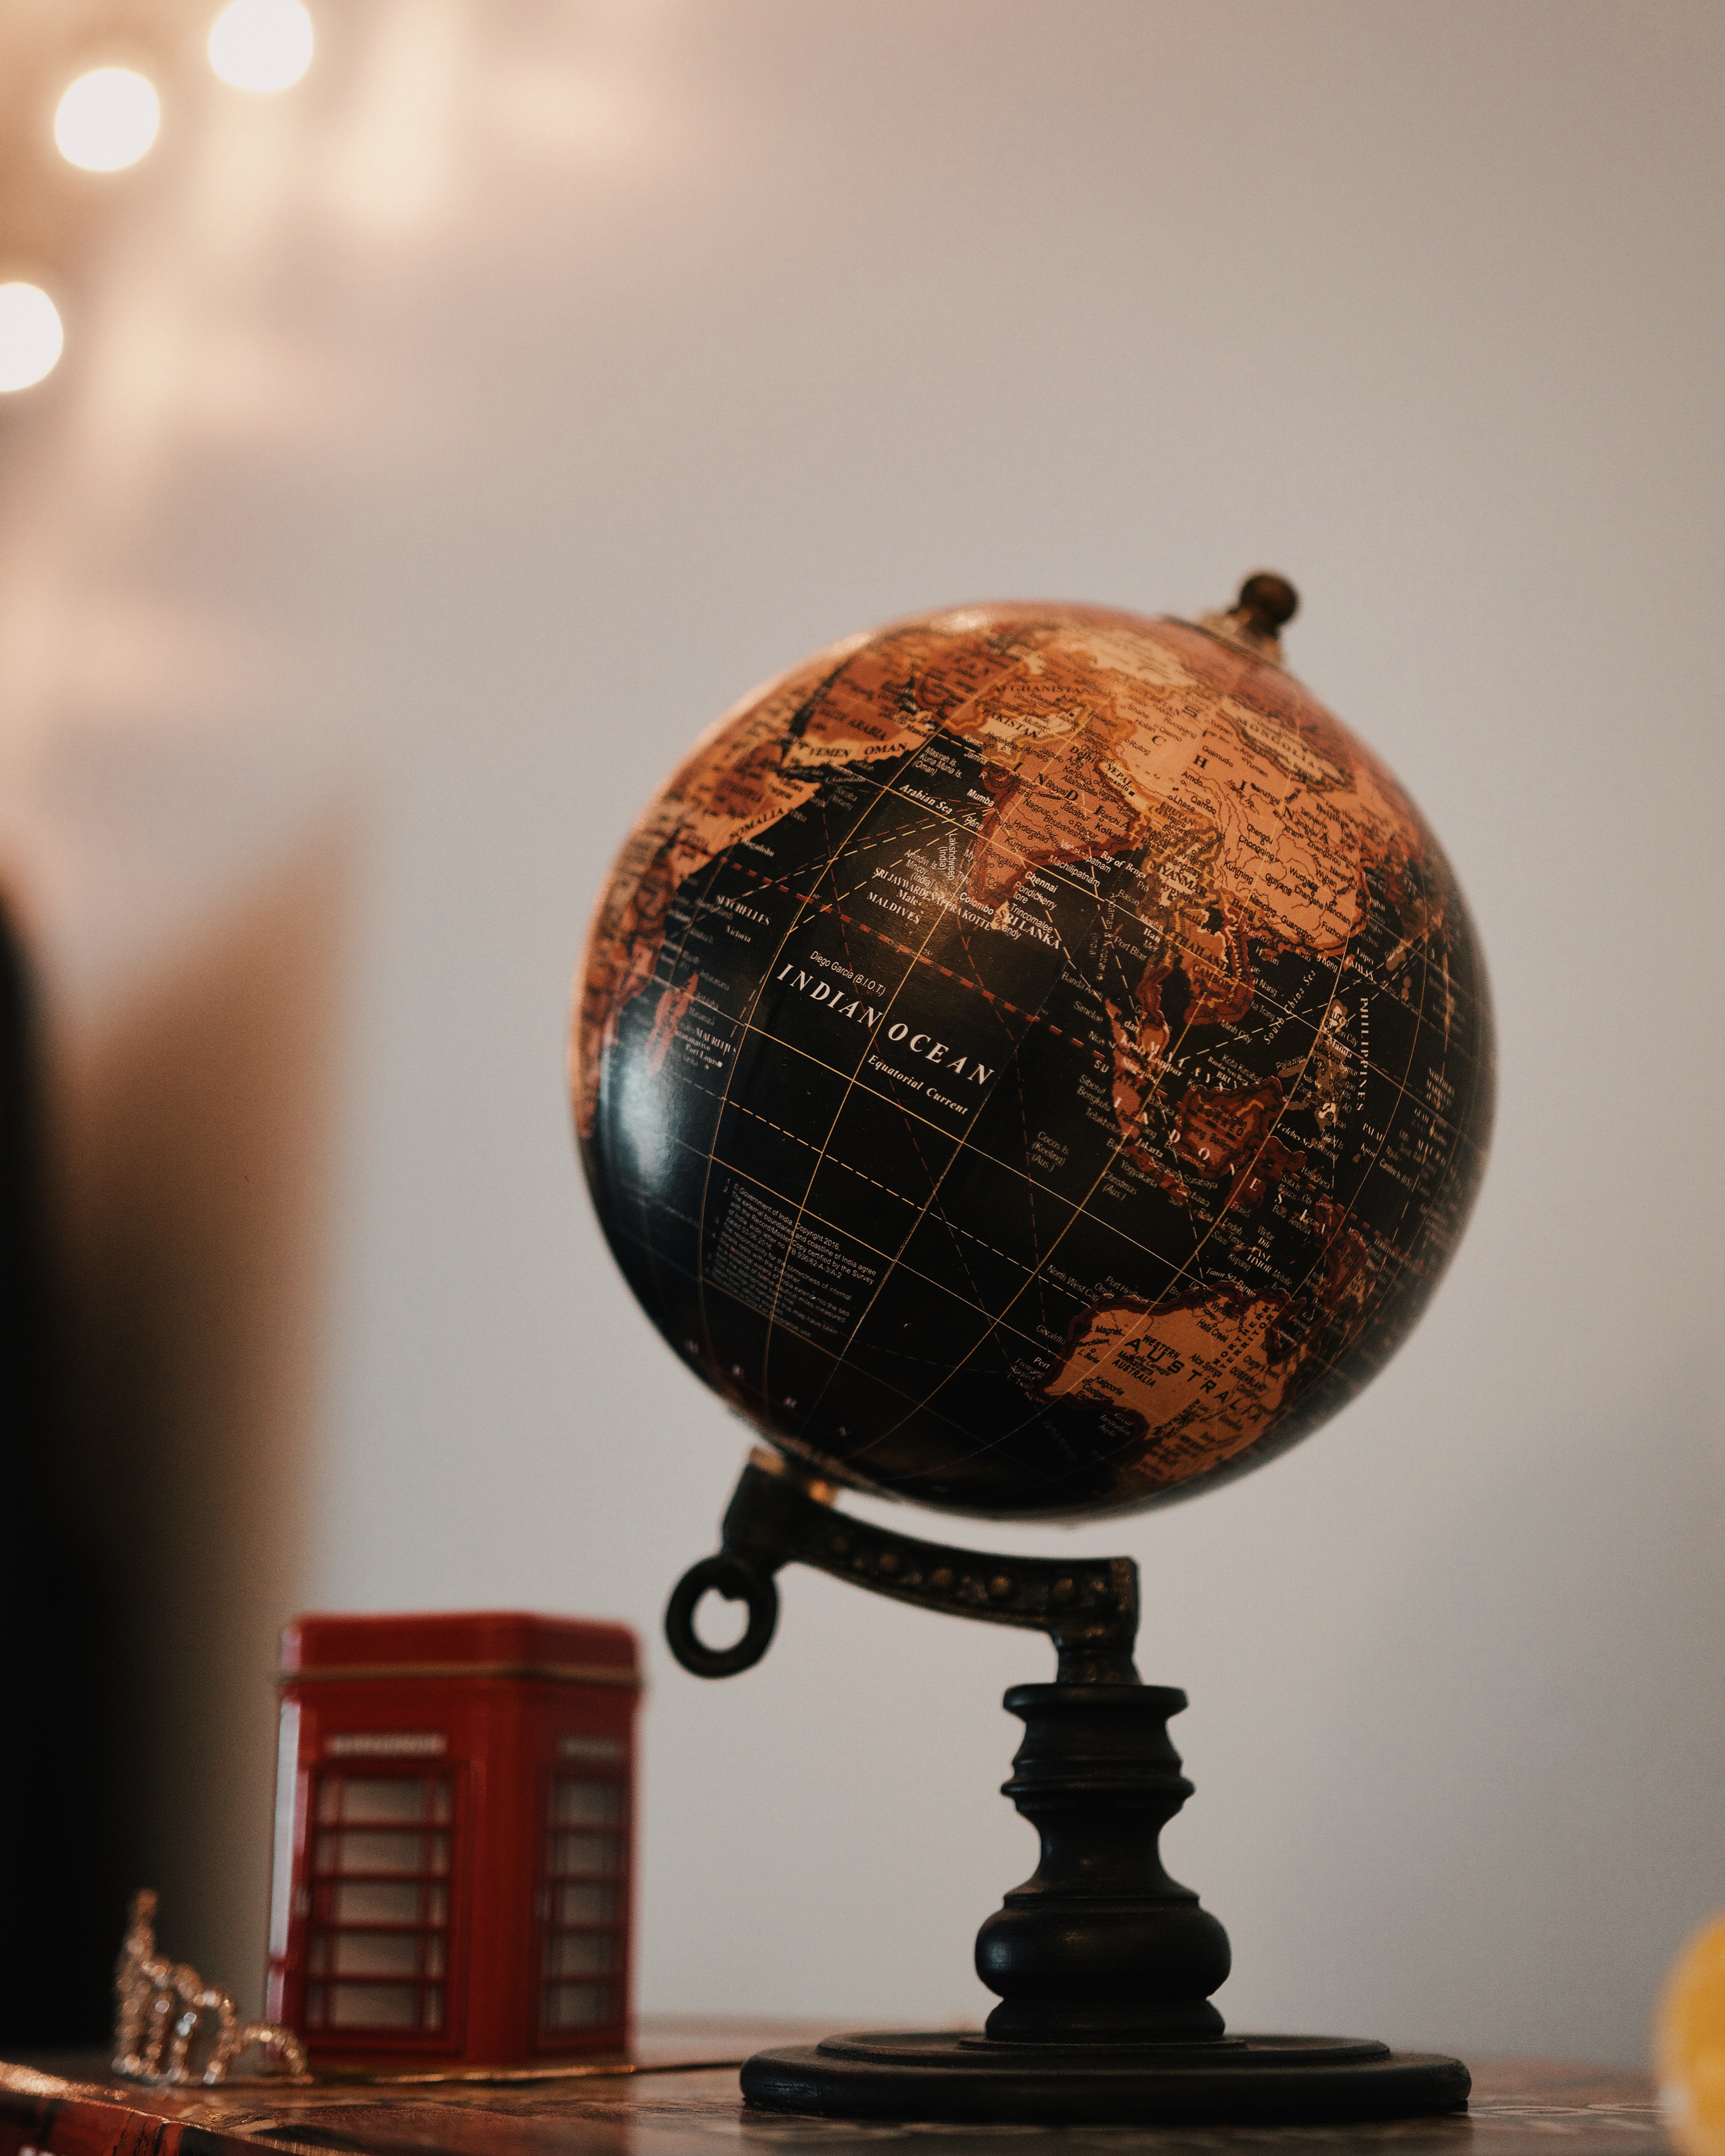 miscellanea, geography, miscellaneous, land, earth, ball, map, sphere, globe lock screen backgrounds